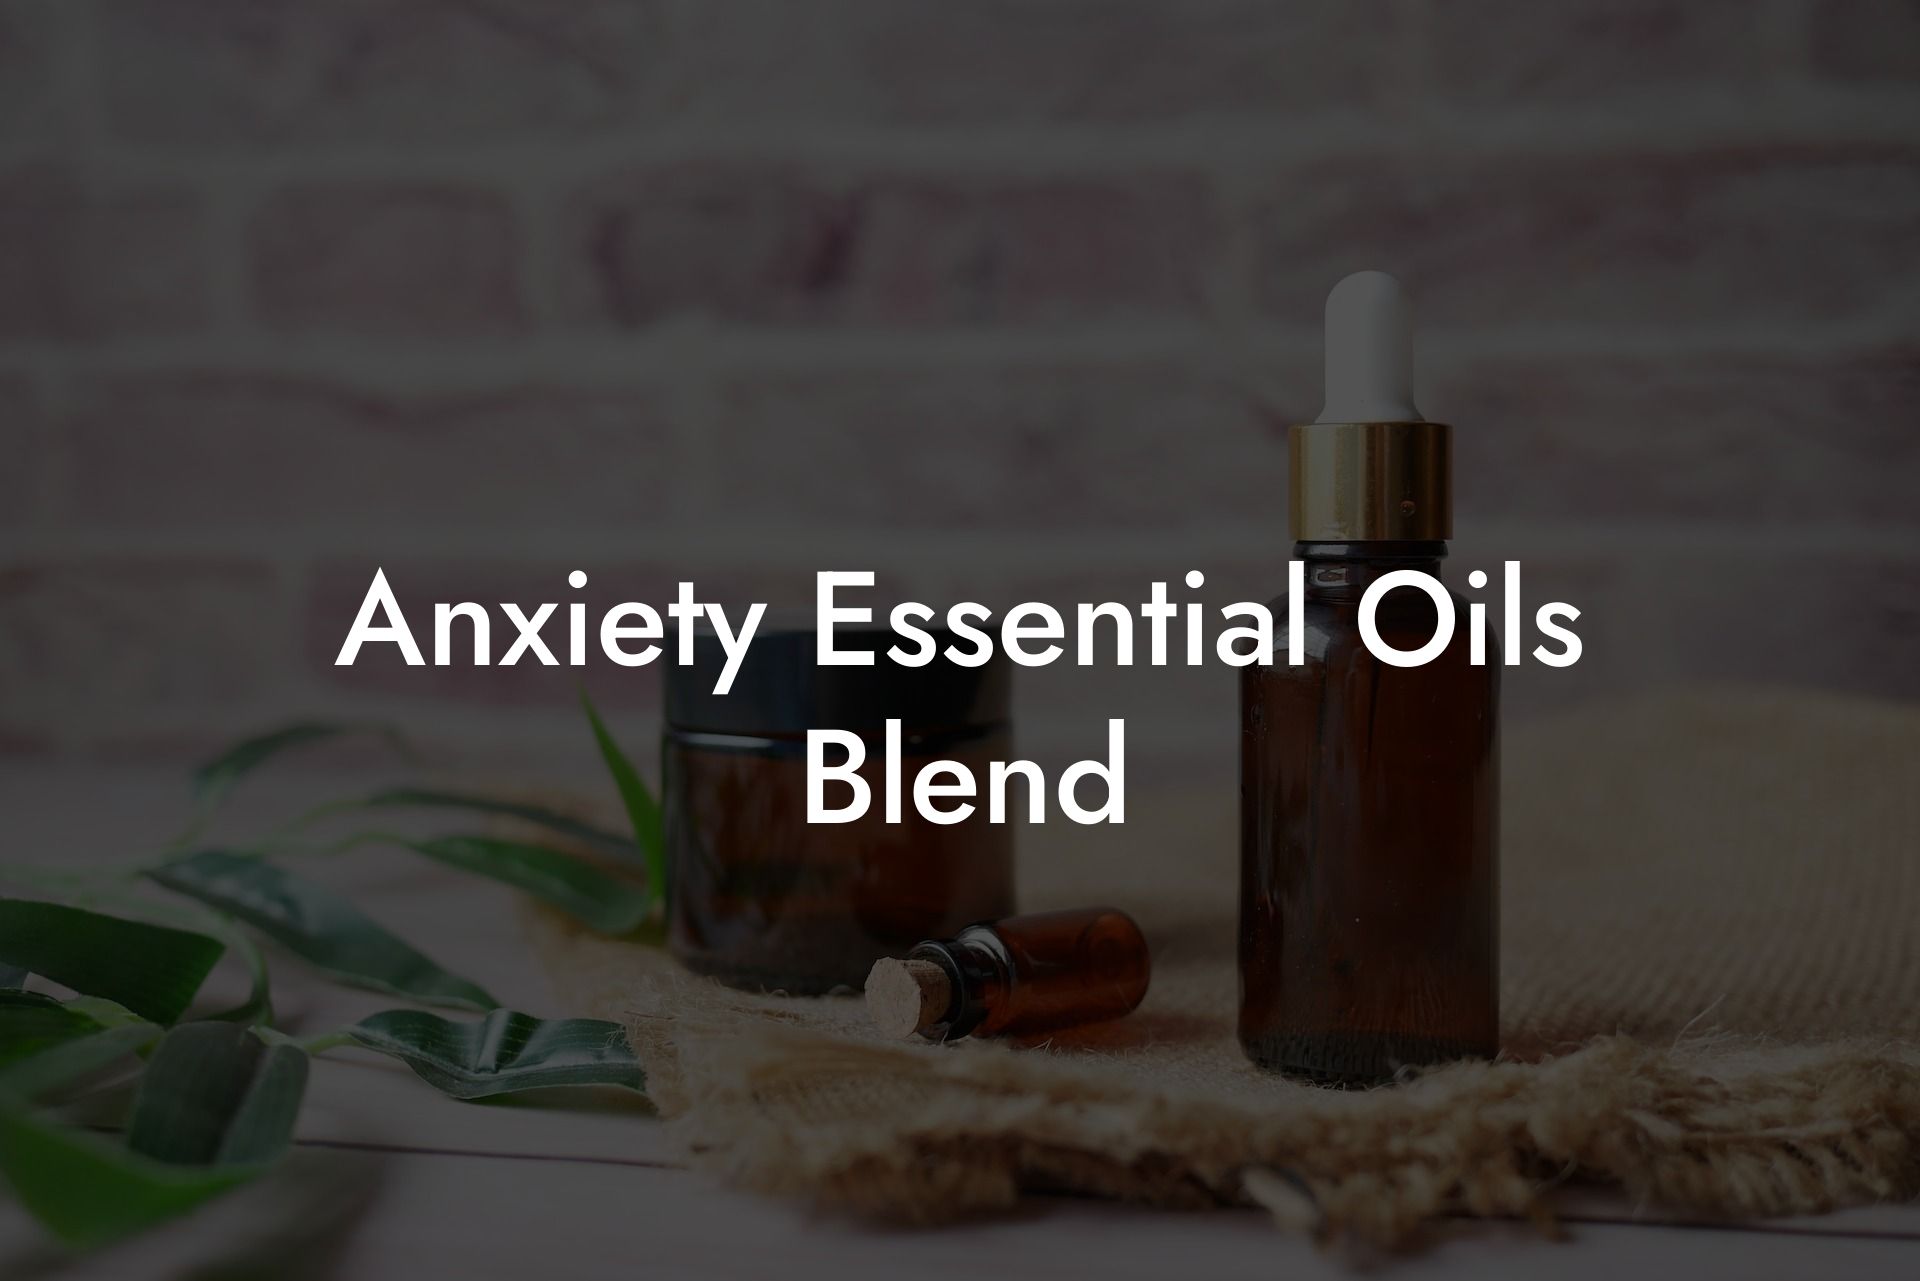 Anxiety Essential Oils Blend